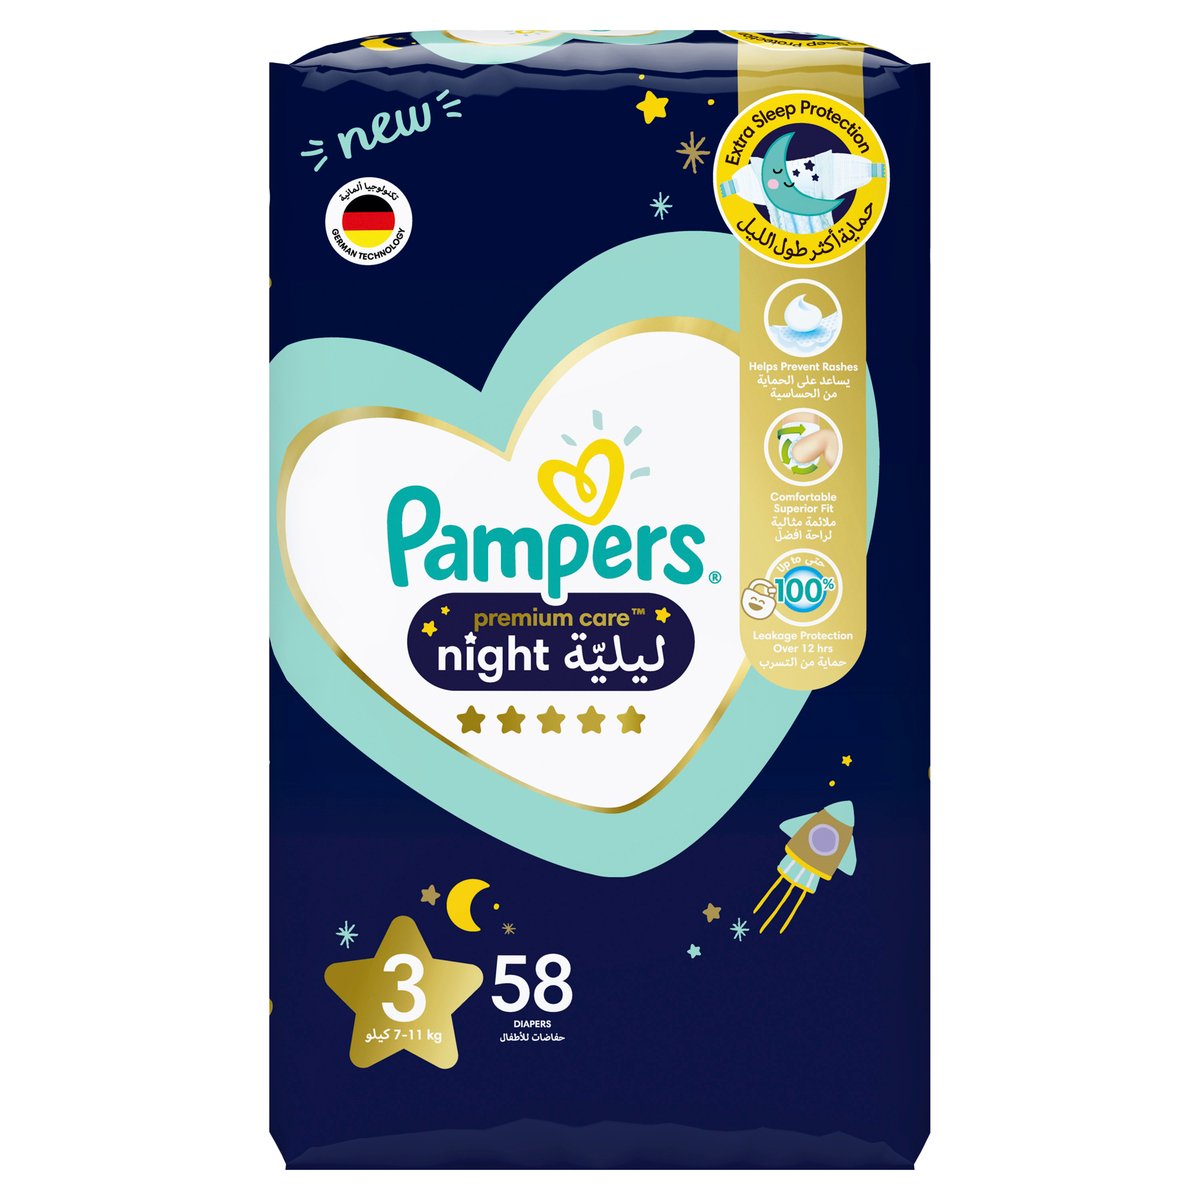 Pampers Premium Care Night Diapers Size 3, 7-11kg 58pcs